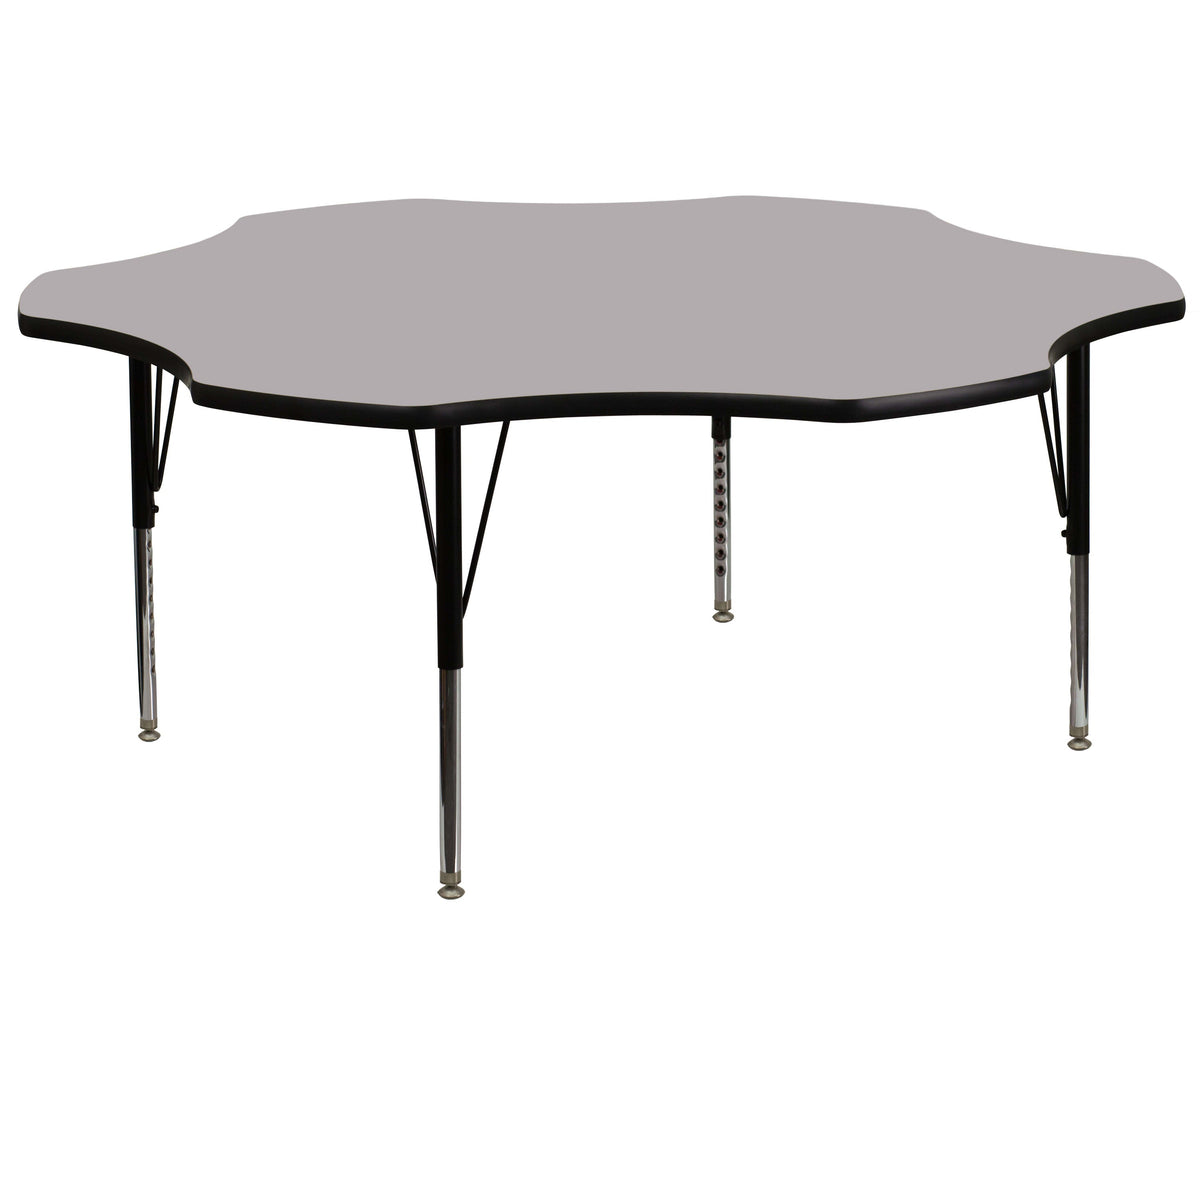 Gray |#| 60inch Flower Grey Thermal Laminate Activity Table - Height Adjustable Short Legs